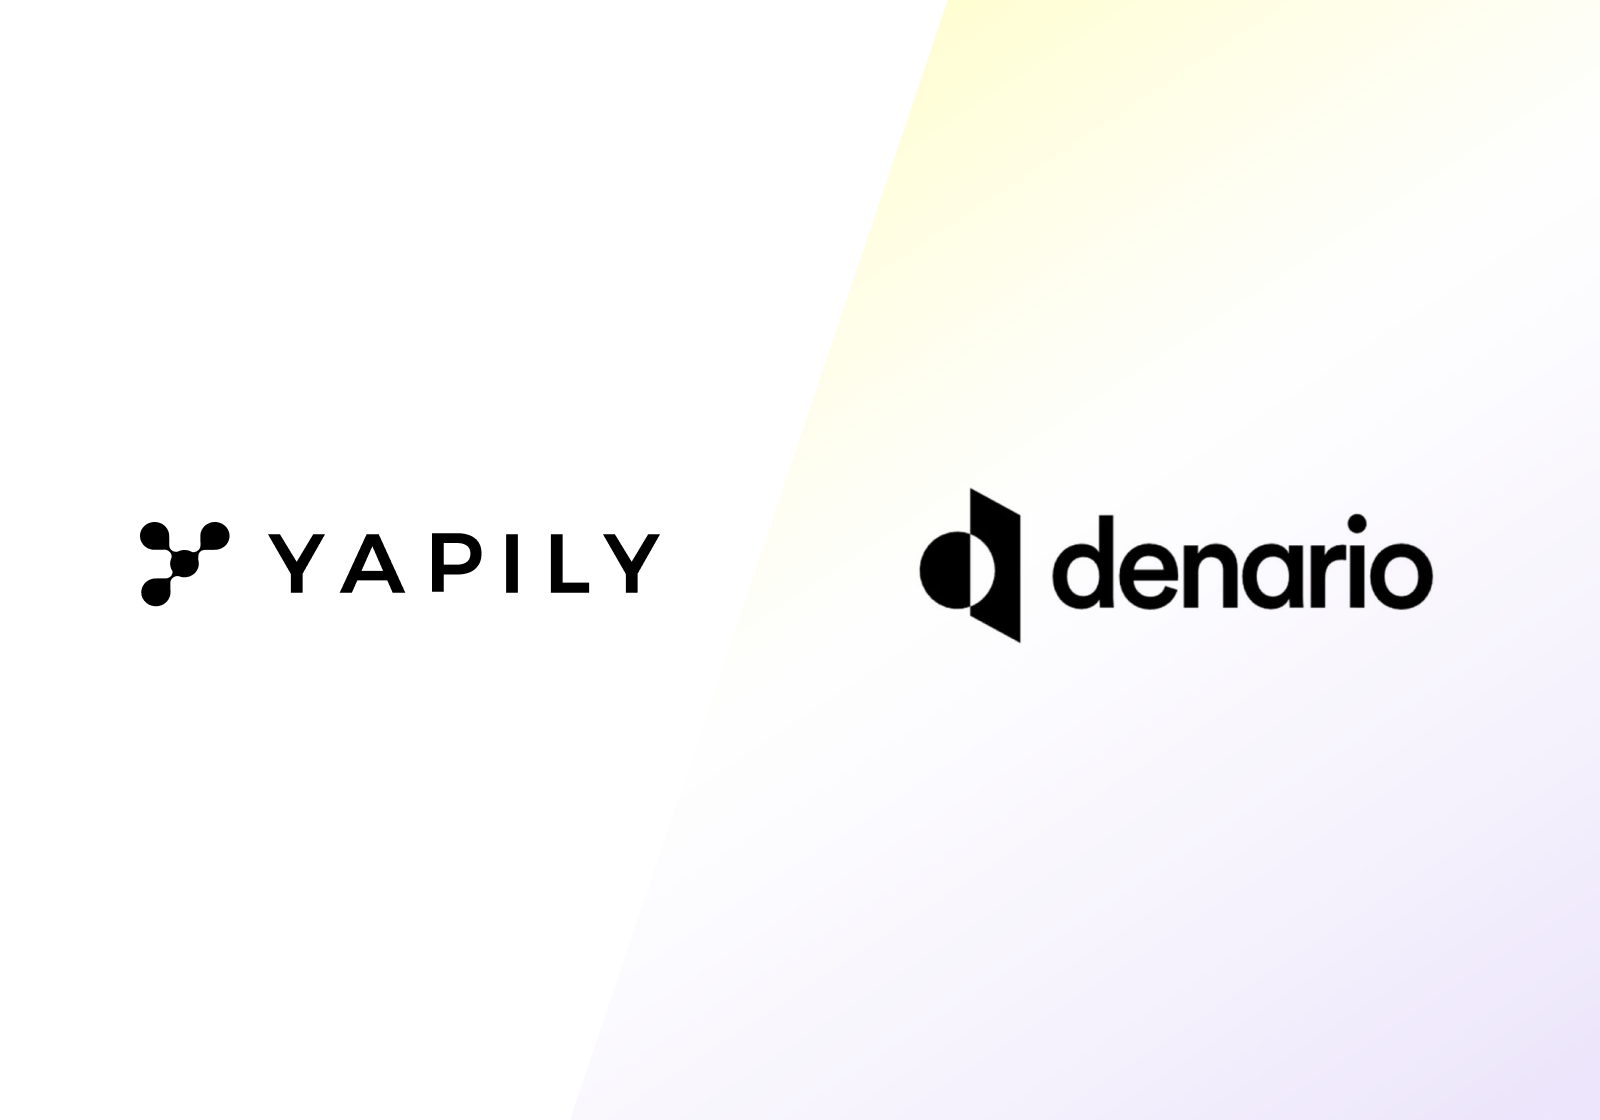 Denario selects Yapily to enhance its payments platform for European SMBs